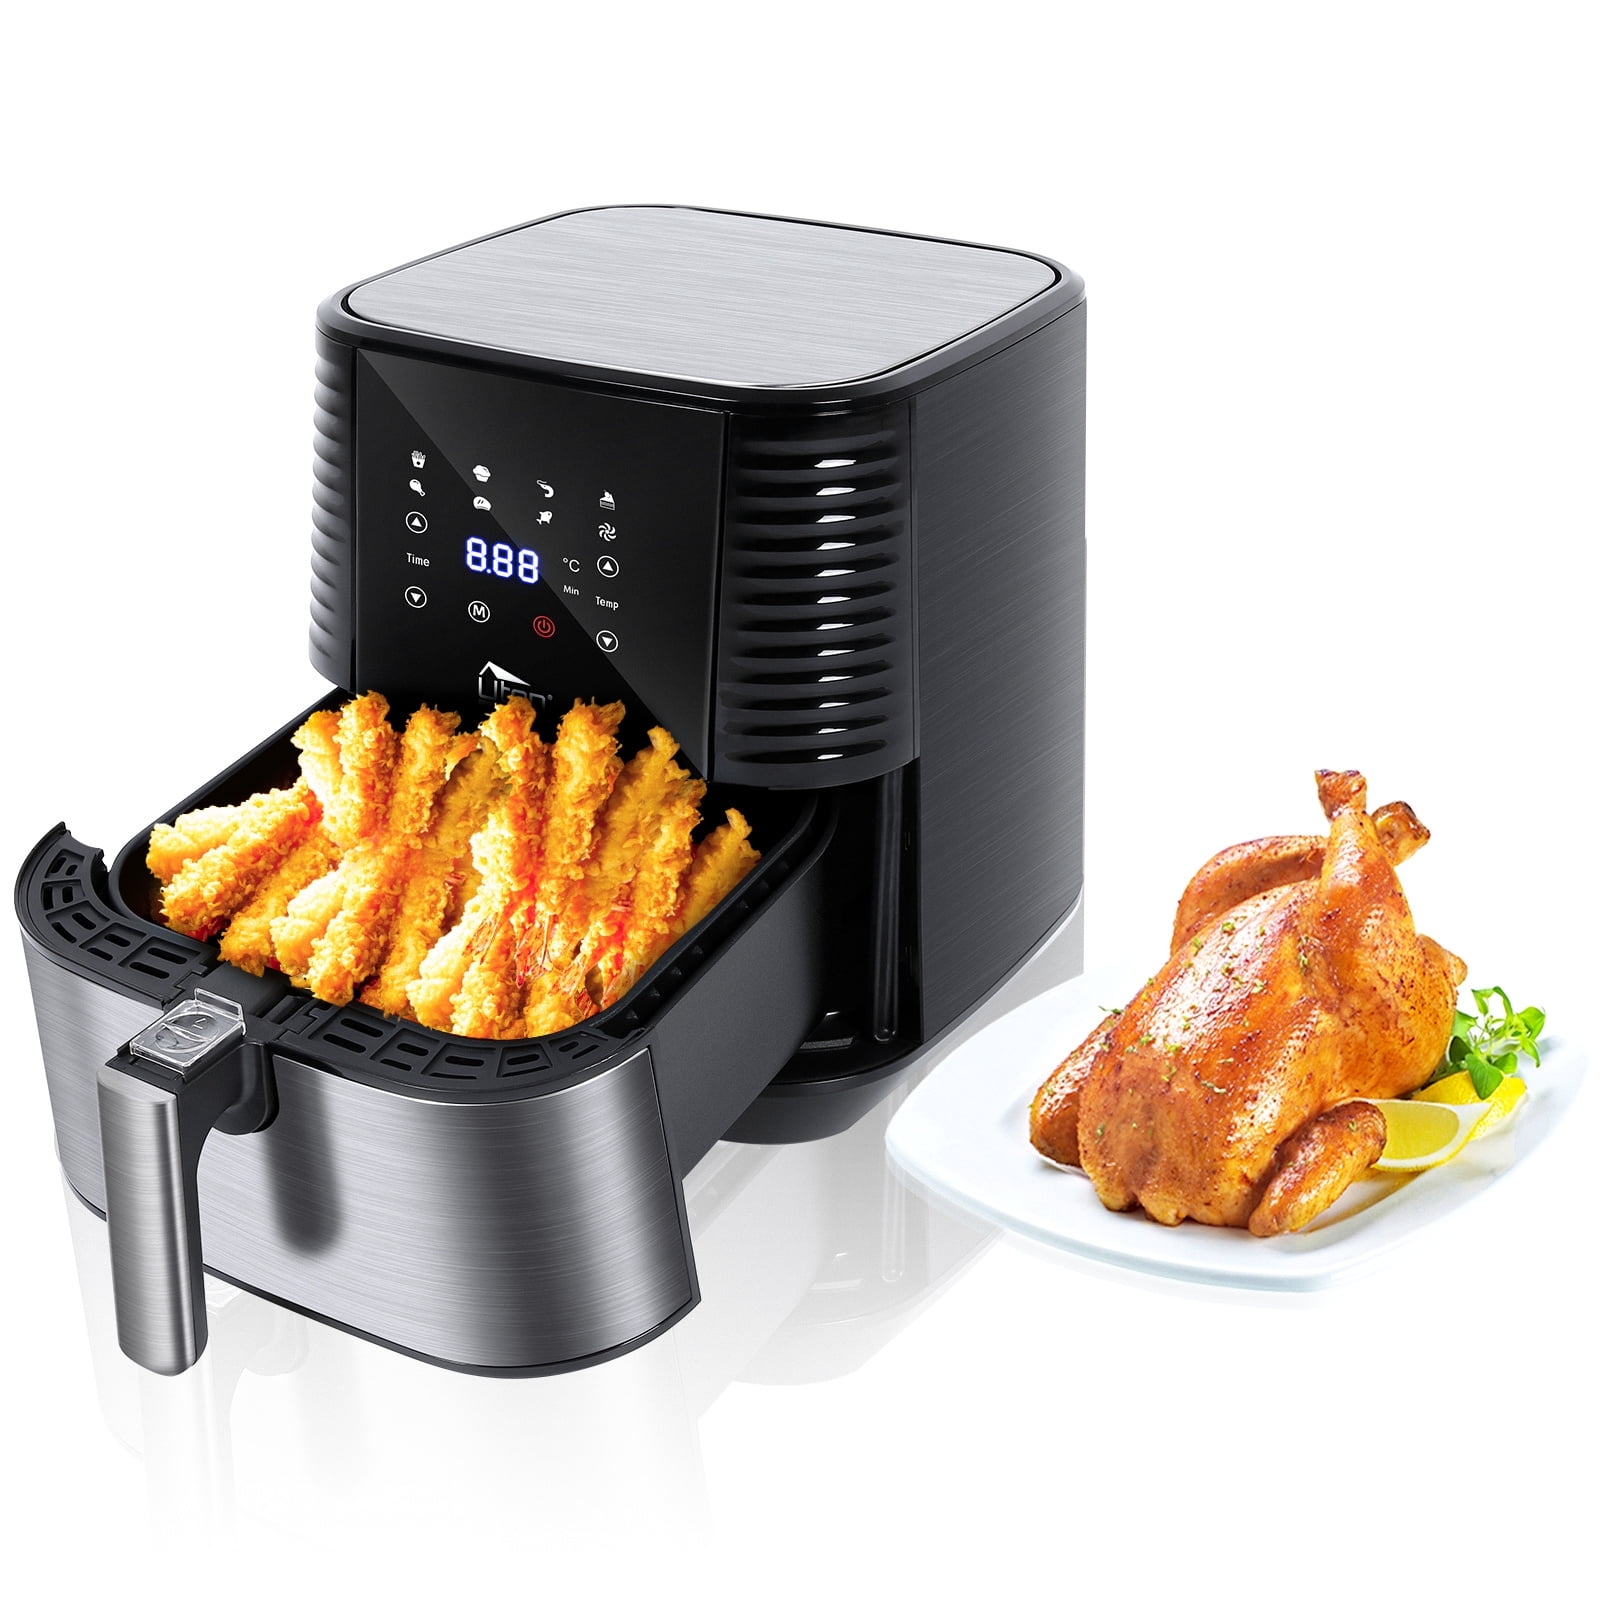  Air Fryer Oven Combo, Uten High-power Deep Air Fryer Oven  Grill, Up to 400°F, 1800W, Digital Display, Fast Heat up/Time Control and  Bonus Cookbook : Home & Kitchen